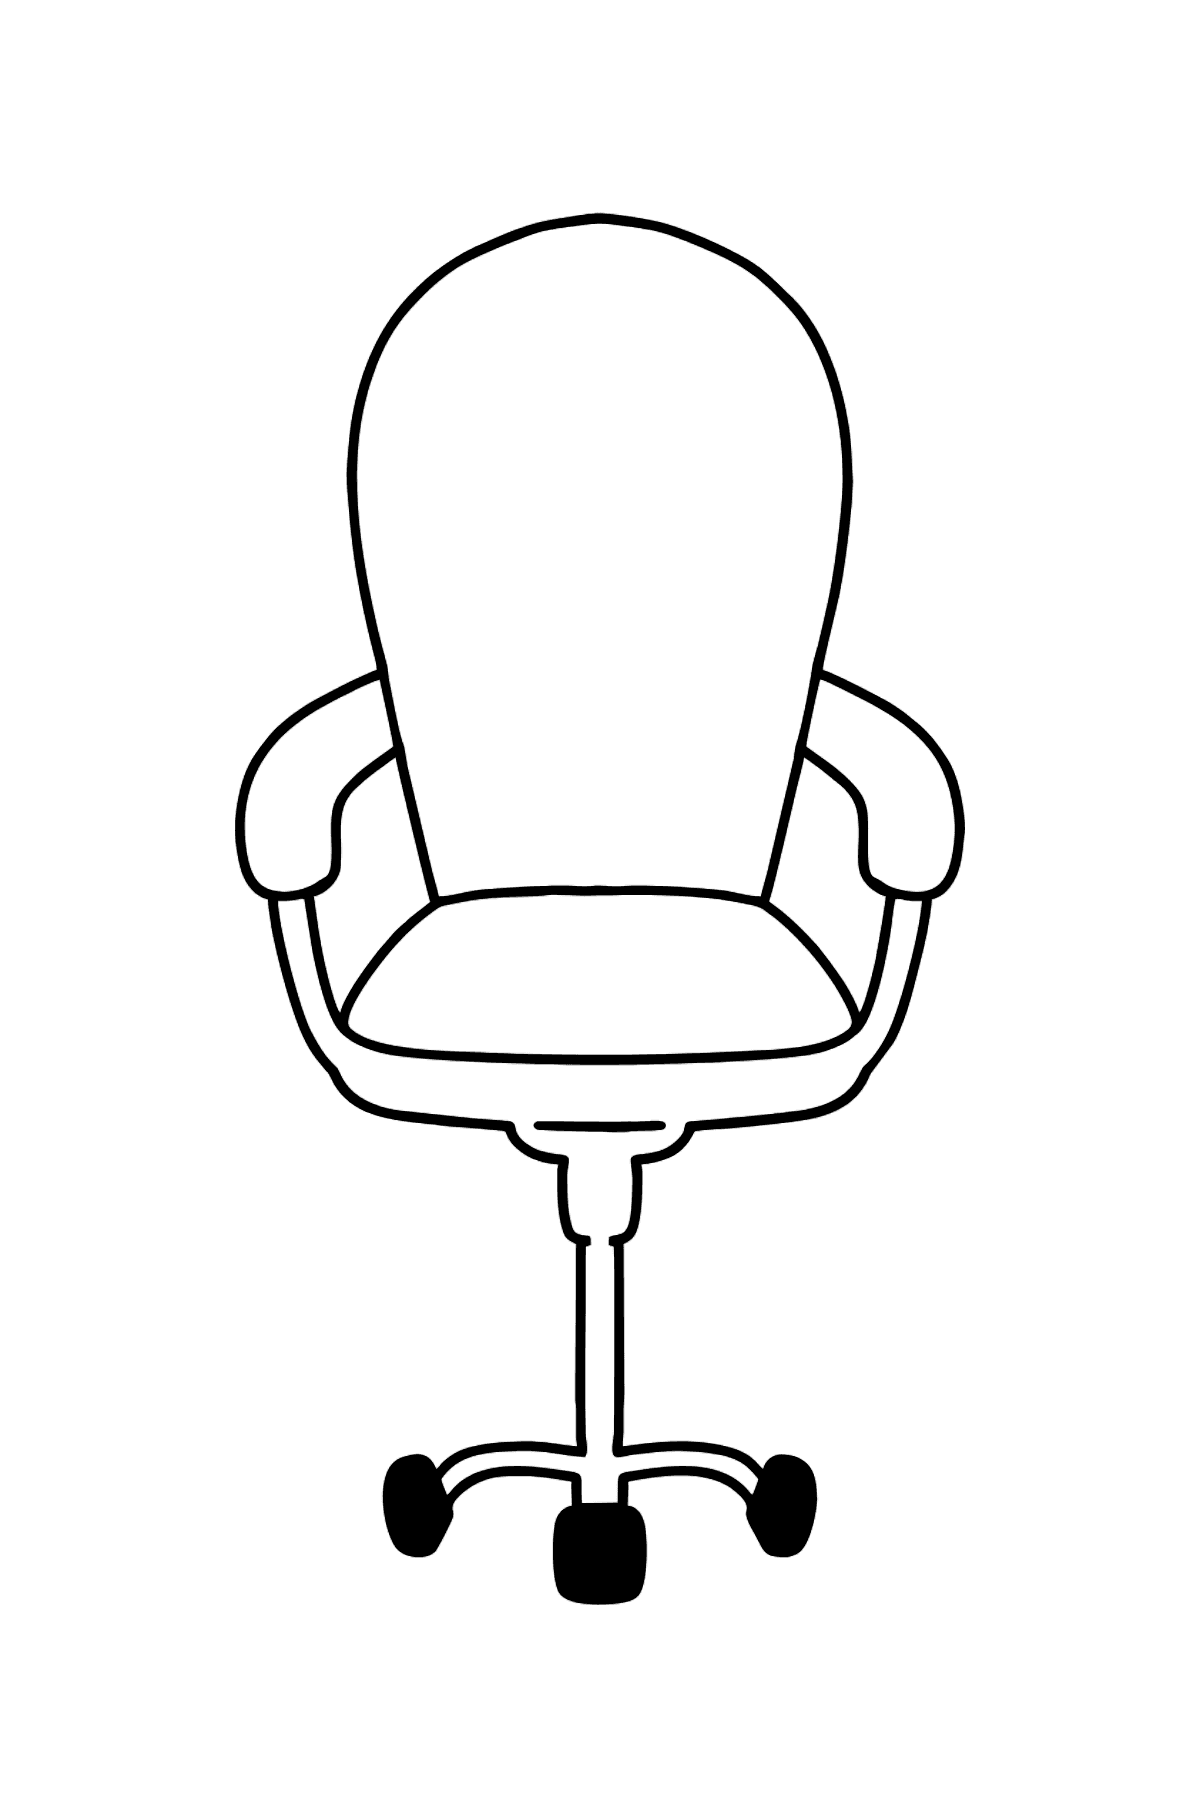 Computer Chair coloring page - Coloring Pages for Kids